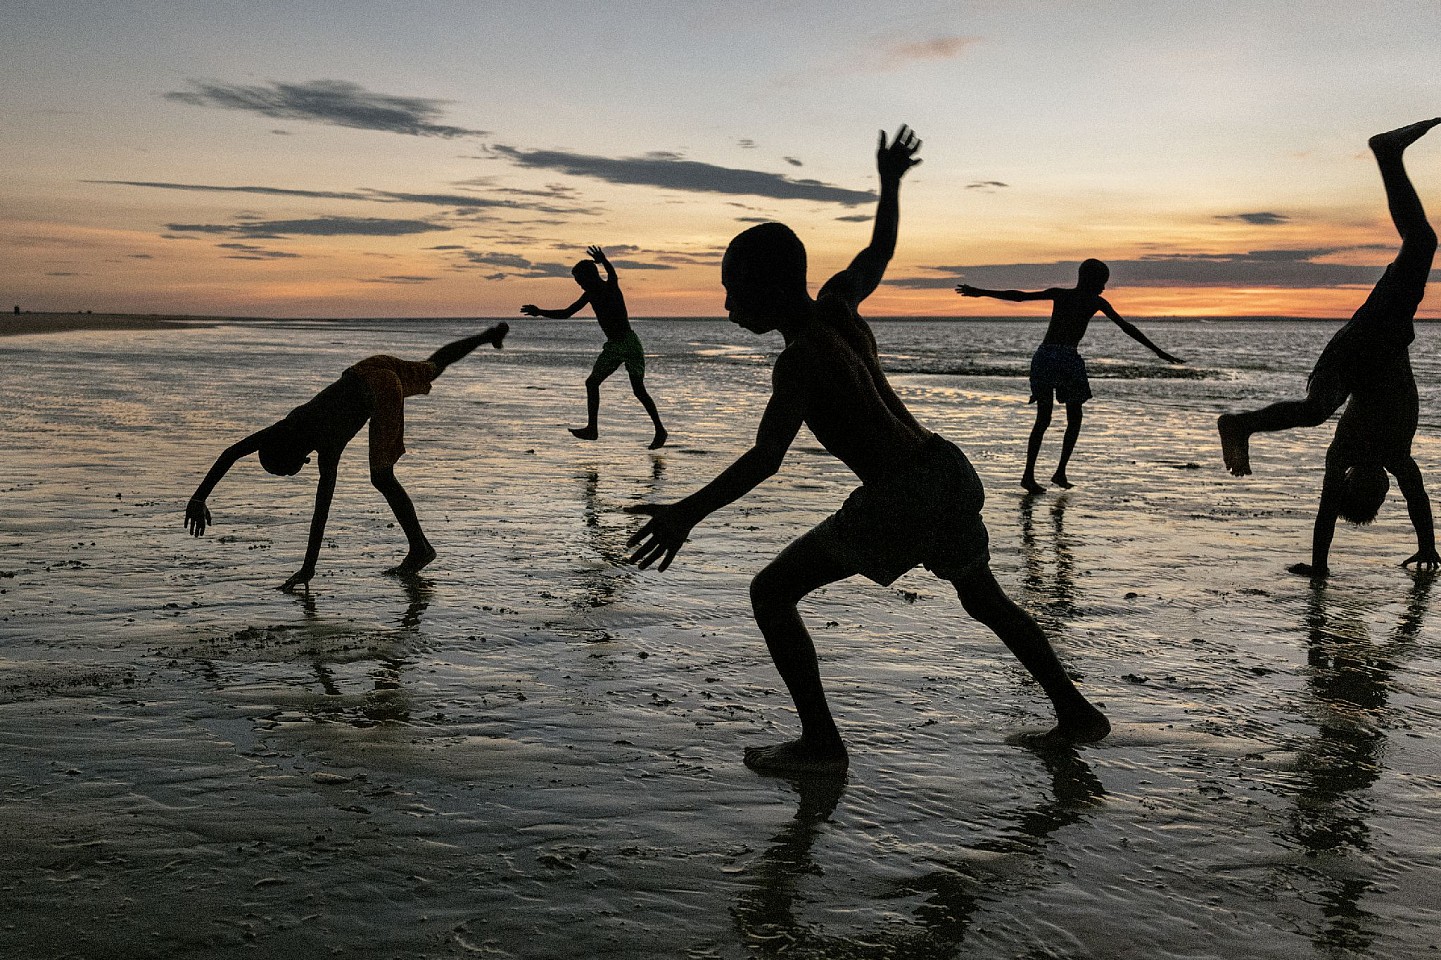 Steve McCurry, Kids Play on Beach, 2019
FujiFlex Crystal Archive Print
Price/Size on request